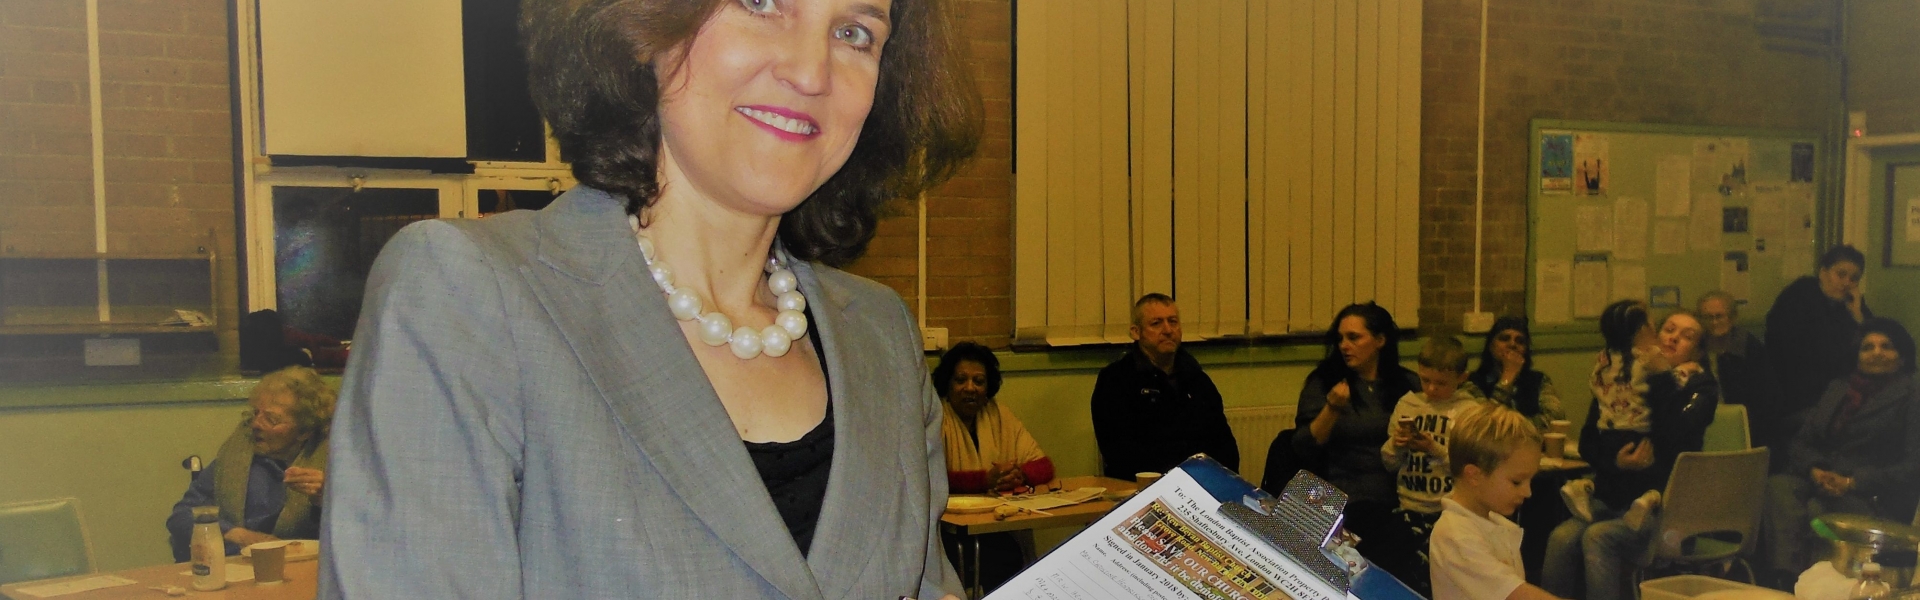 Theresa Villiers supports "Save our church" campaign